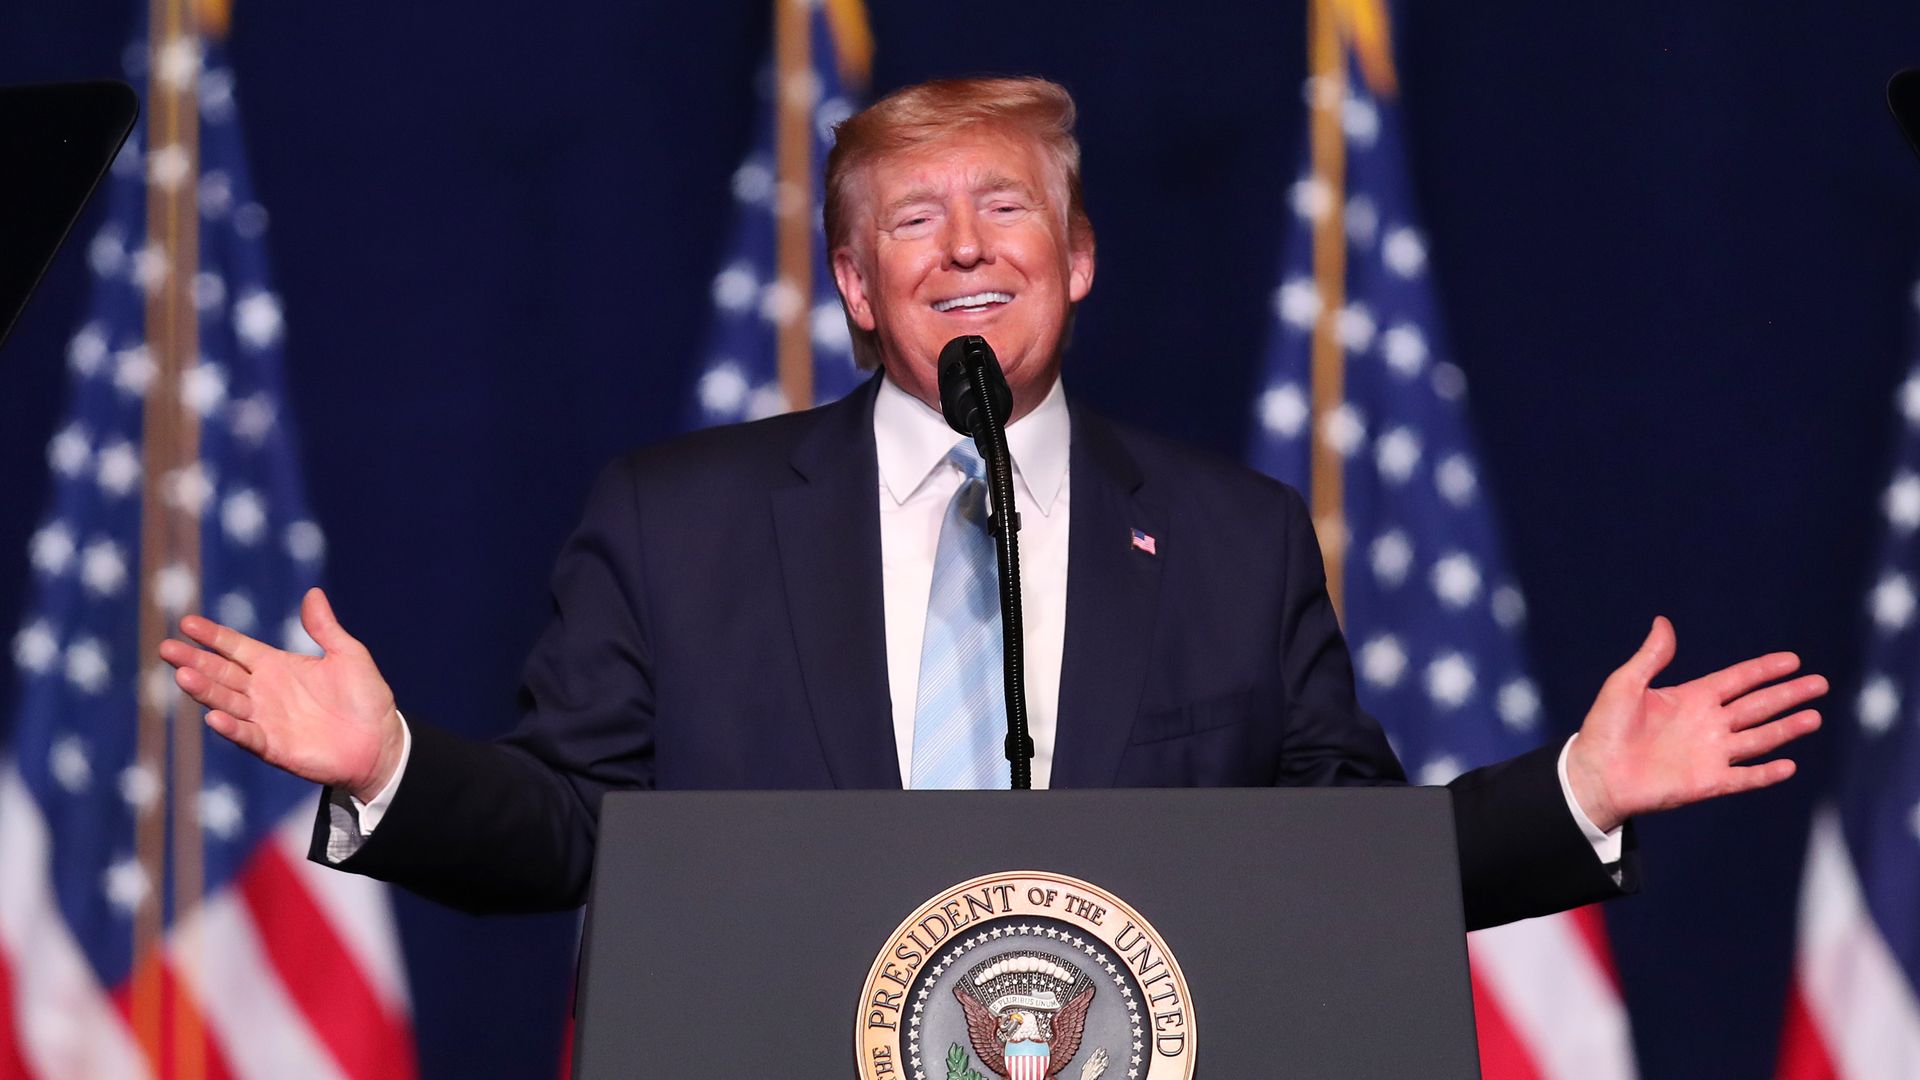 President Donald Trump speaks during a 'Evangelicals for Trump' campaign event held at the King Jesus International Ministry on January 03, 2020 in Miami